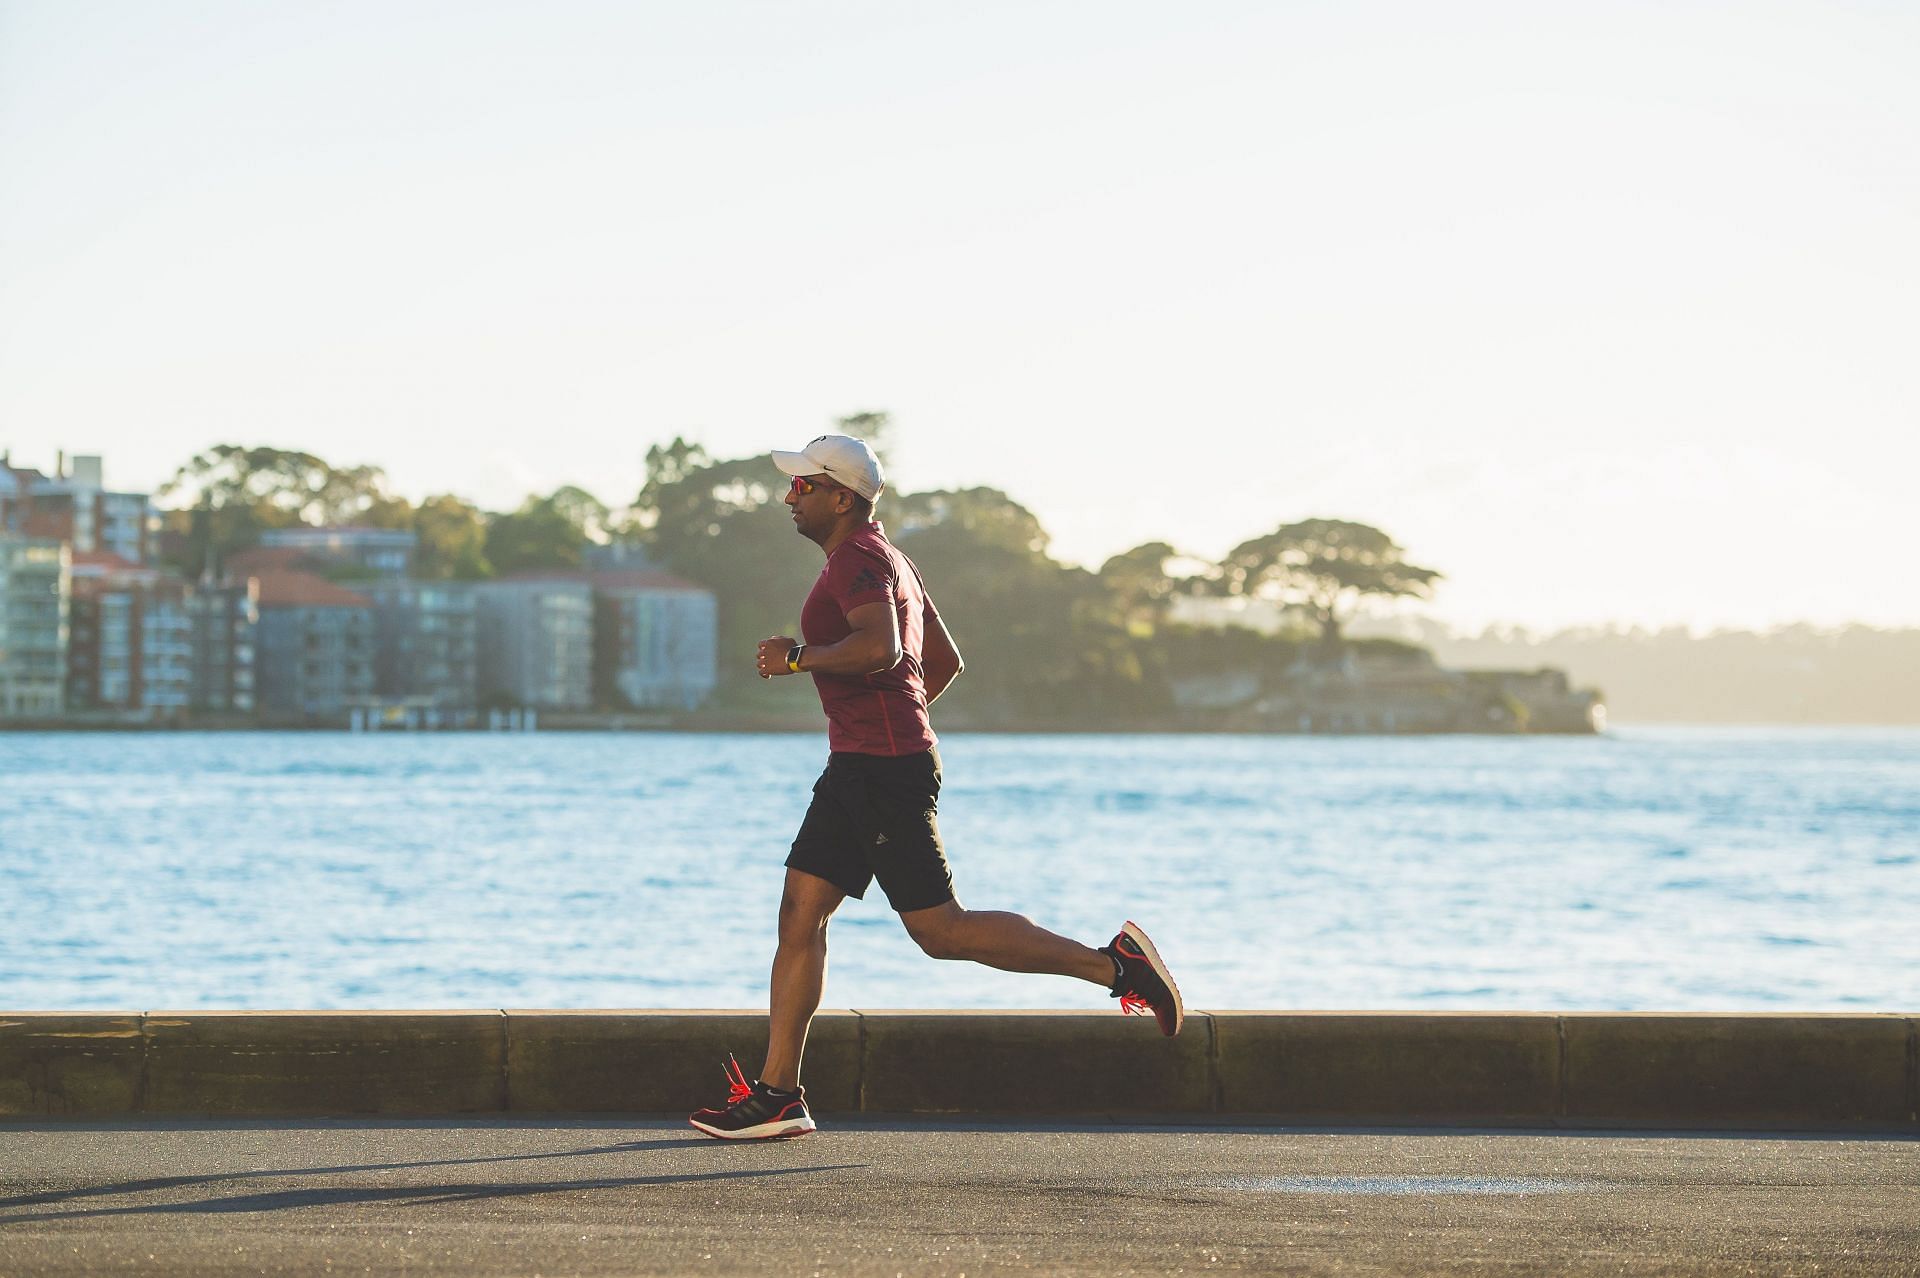 Do you often need help with cardiovascular exercise? If so, this guide is for you! (Image via unsplash/Chander R)